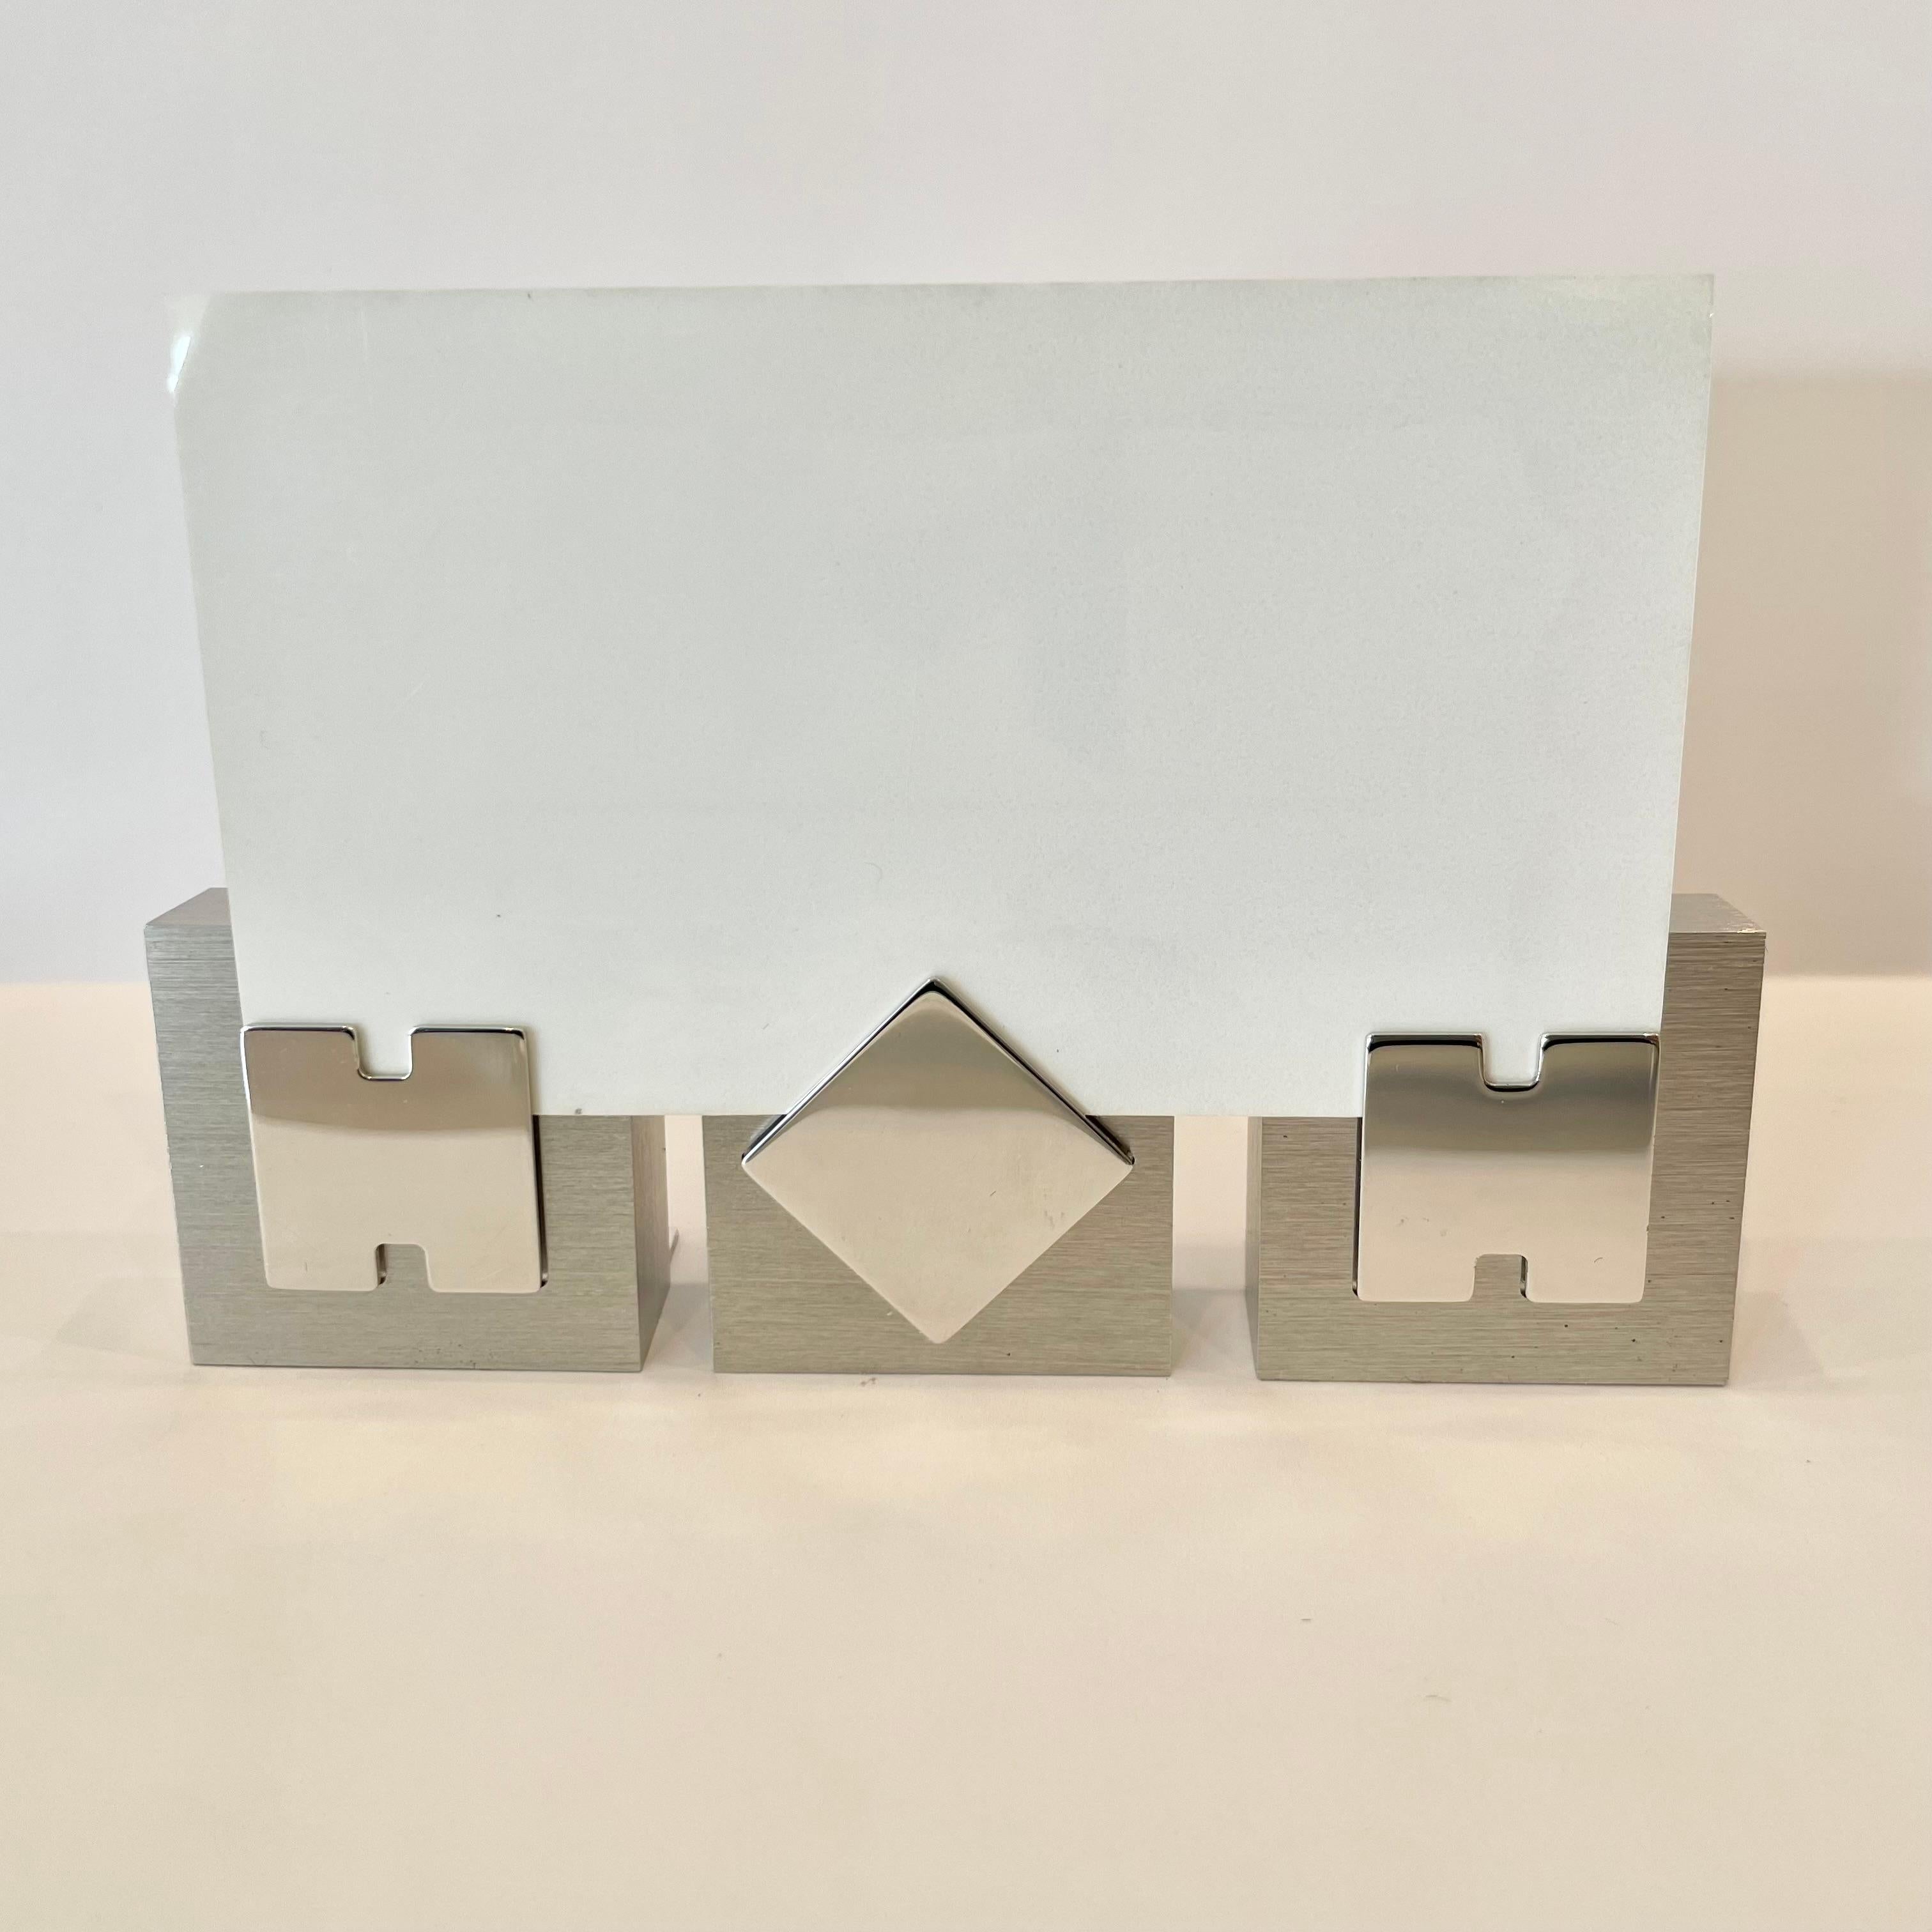 Late 20th Century Set of 3 Hermes Place Card Holders, 1990s France For Sale